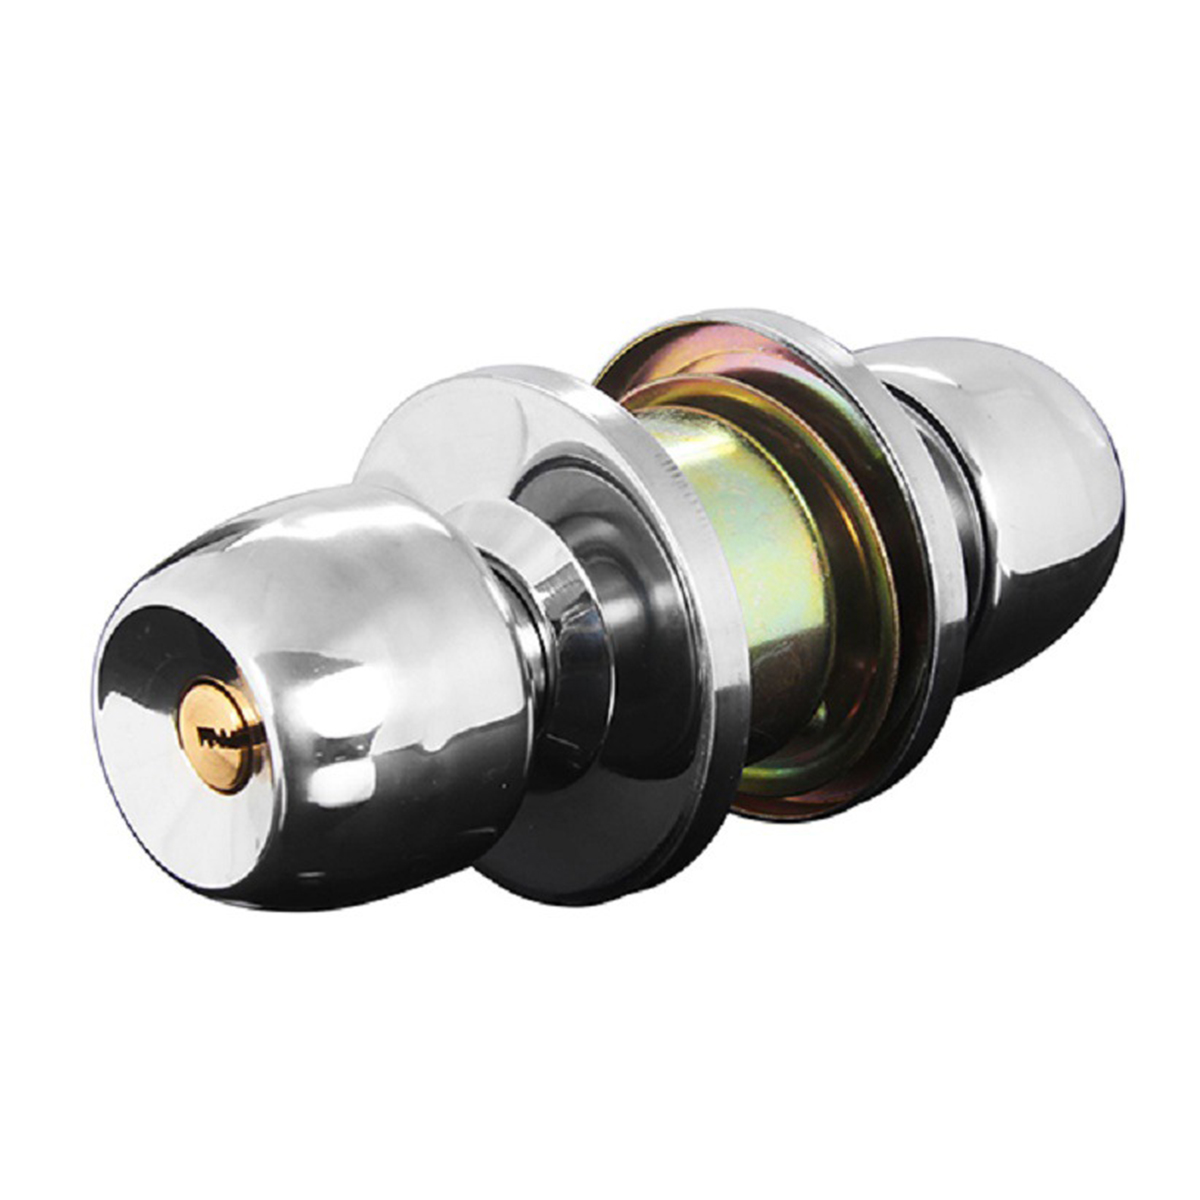 Stainless-Steel-Round-Door-Knobs-Privacy-Passage-Entrance-Lock-Entry-with-3-Keys-1680554-10